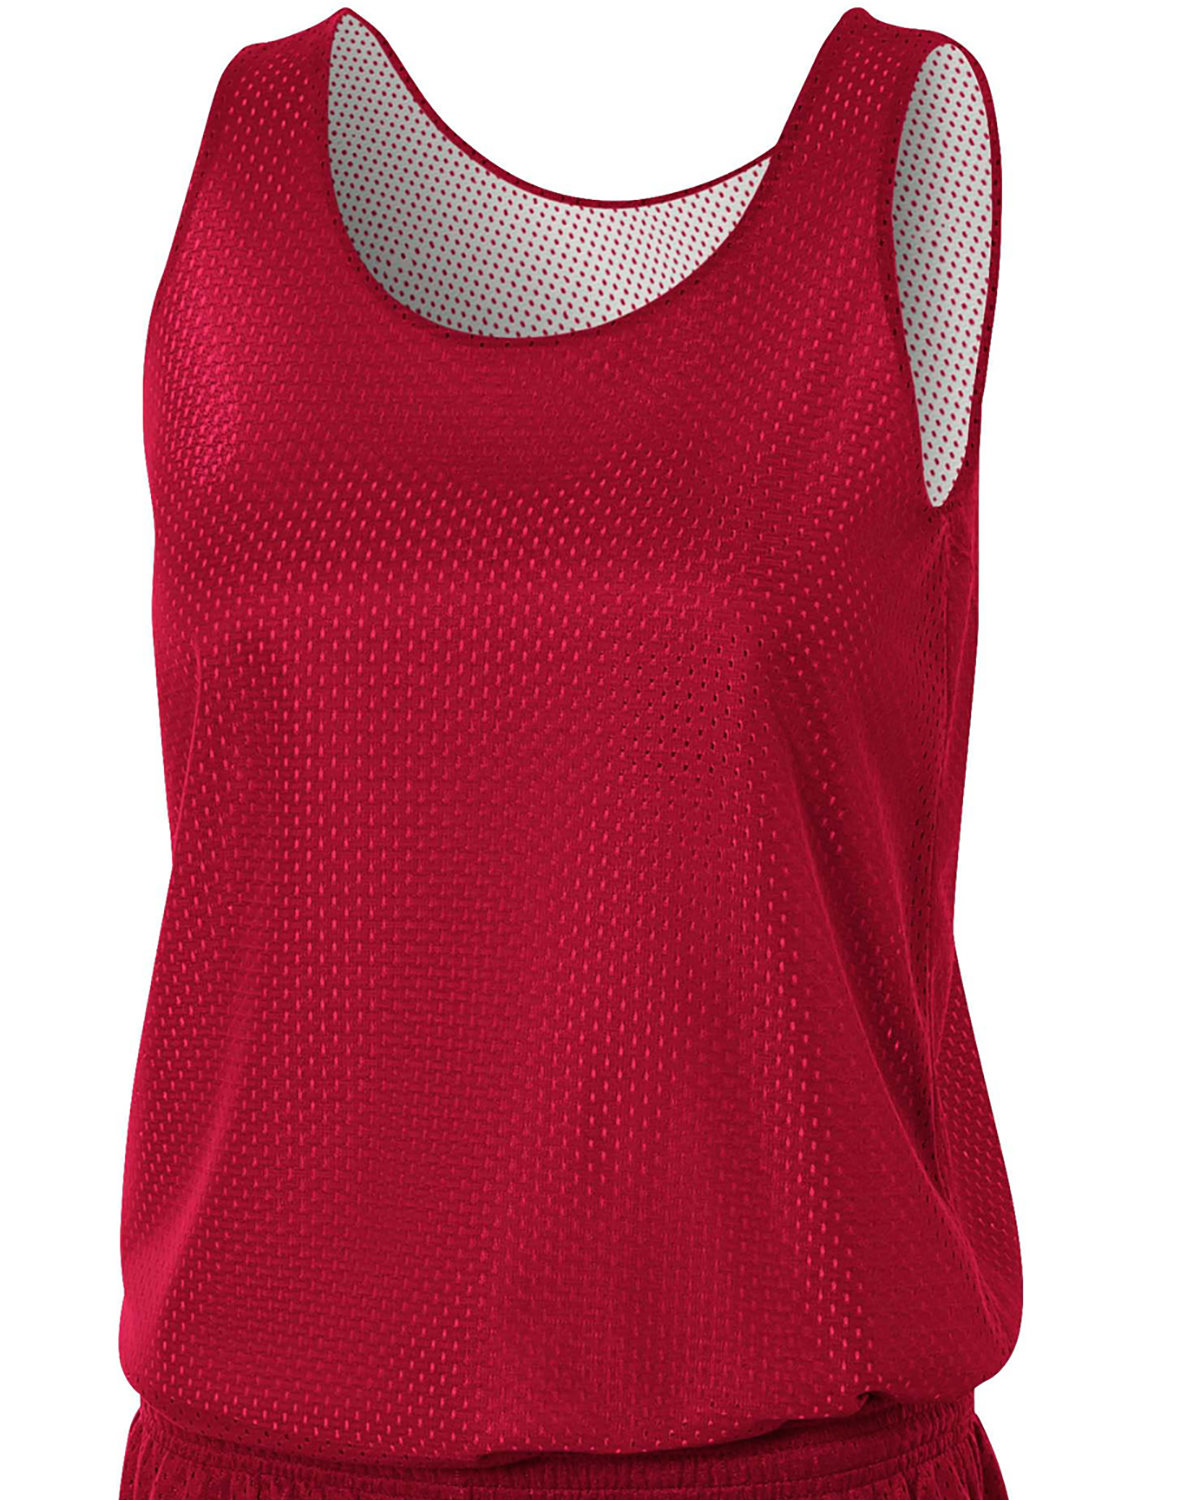 BLANK / NON-DECORATED - Nike Ladies Reversible Mesh Tank, Red SMALL